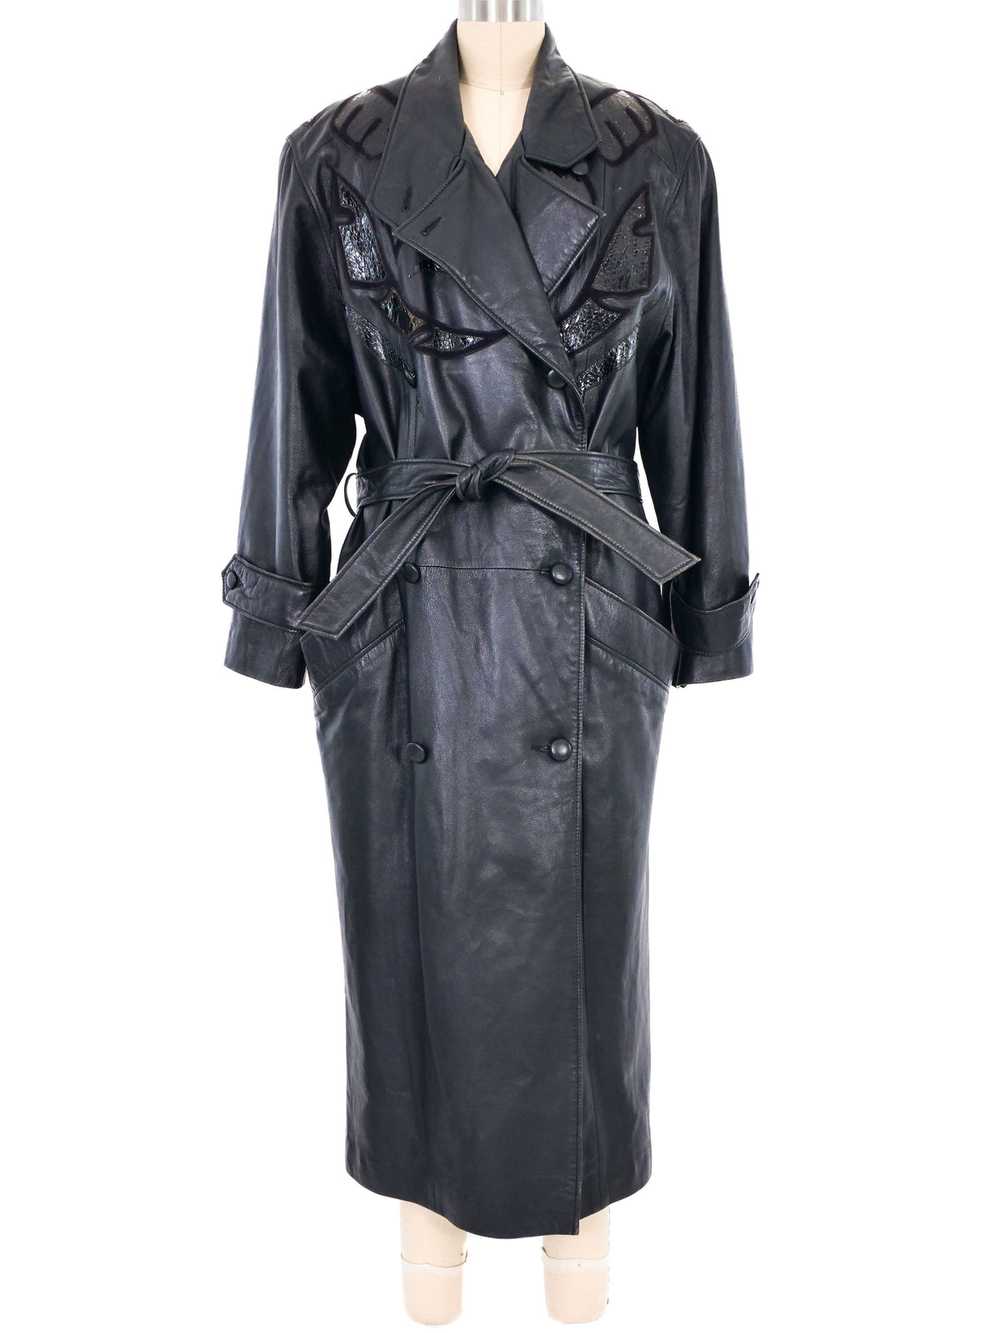 1980s Leather Applique Trench Coat - image 1